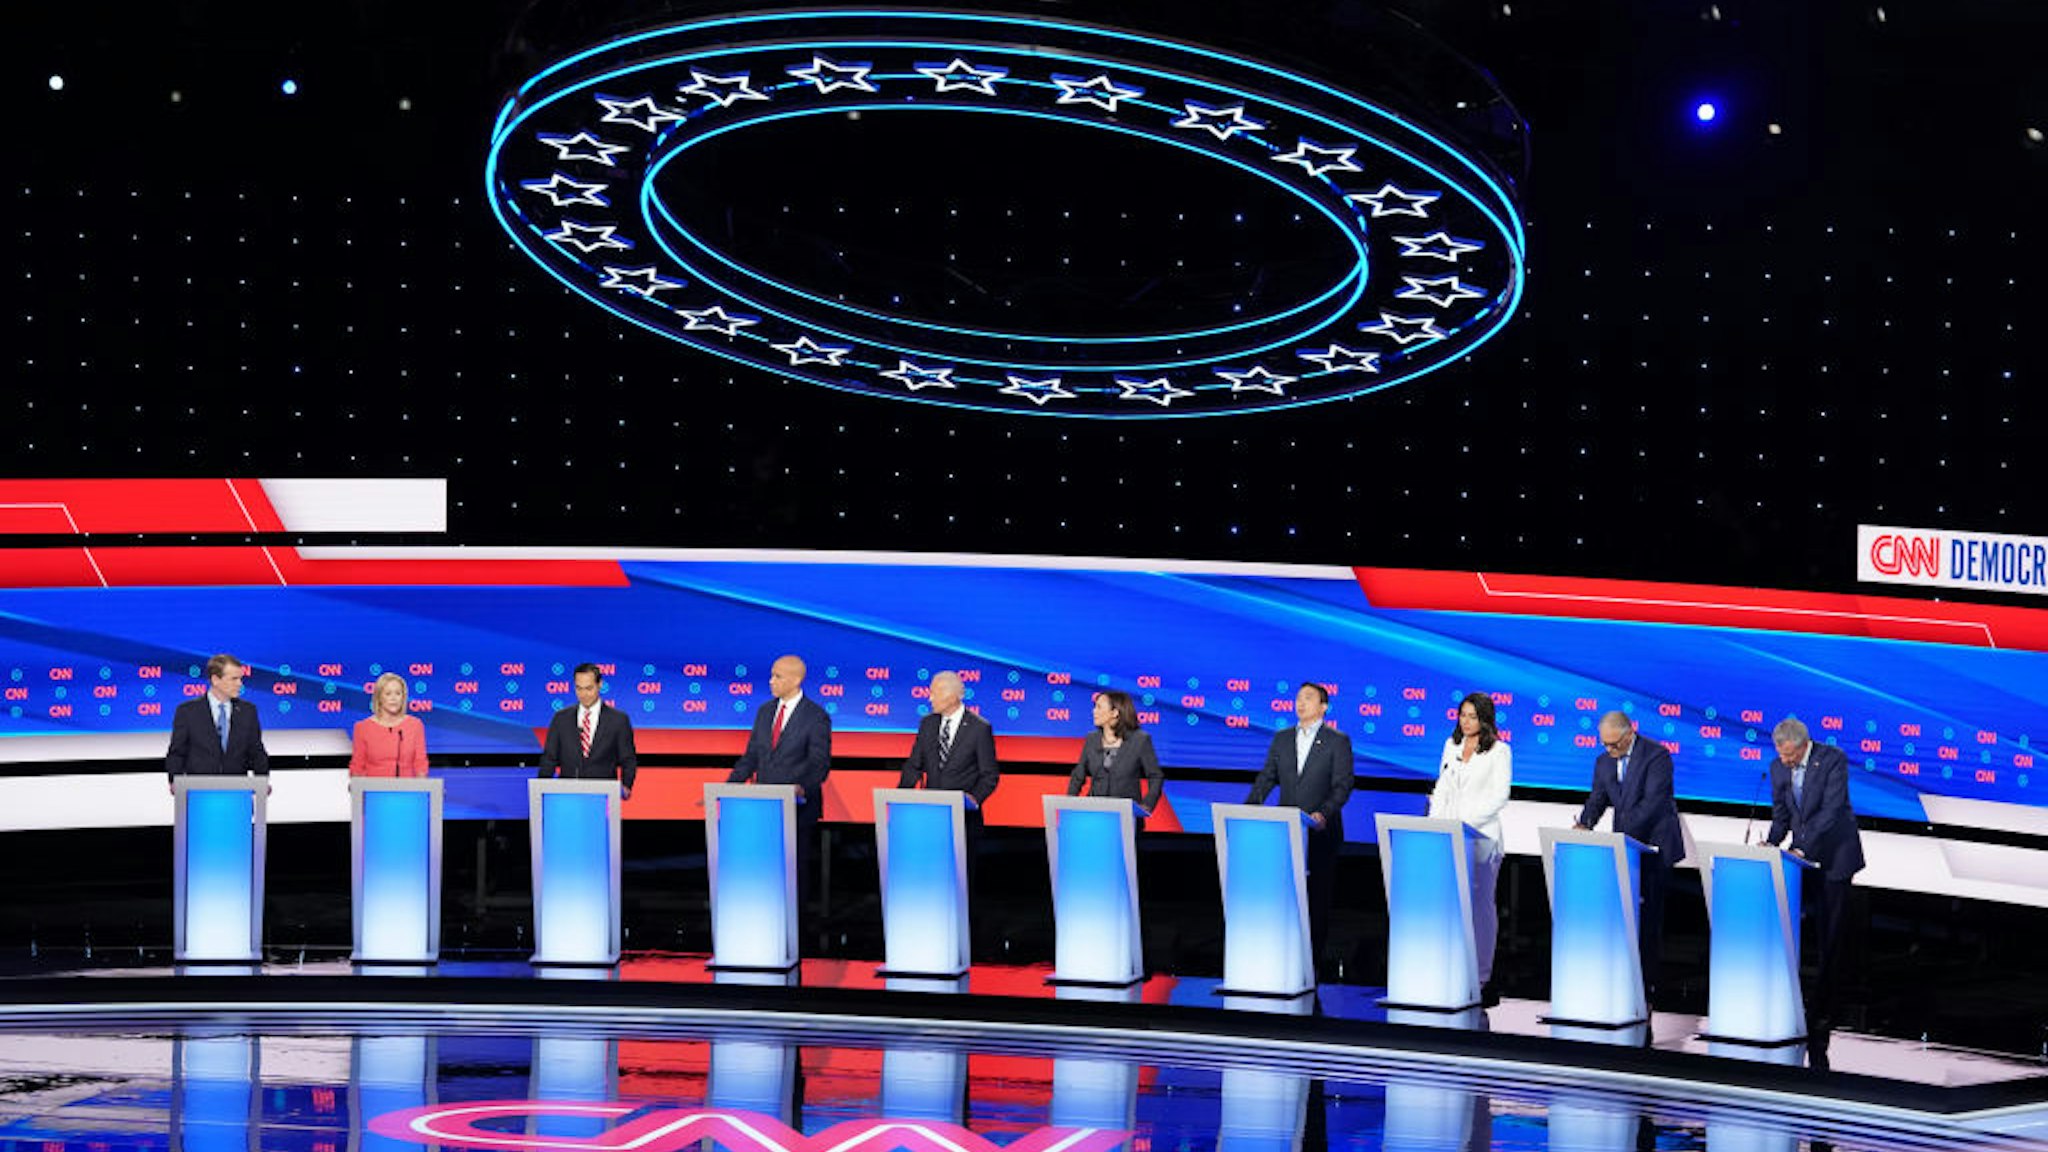 20 Democratic presidential candidates were split into two groups of 10 to take part in the debate sponsored by CNN